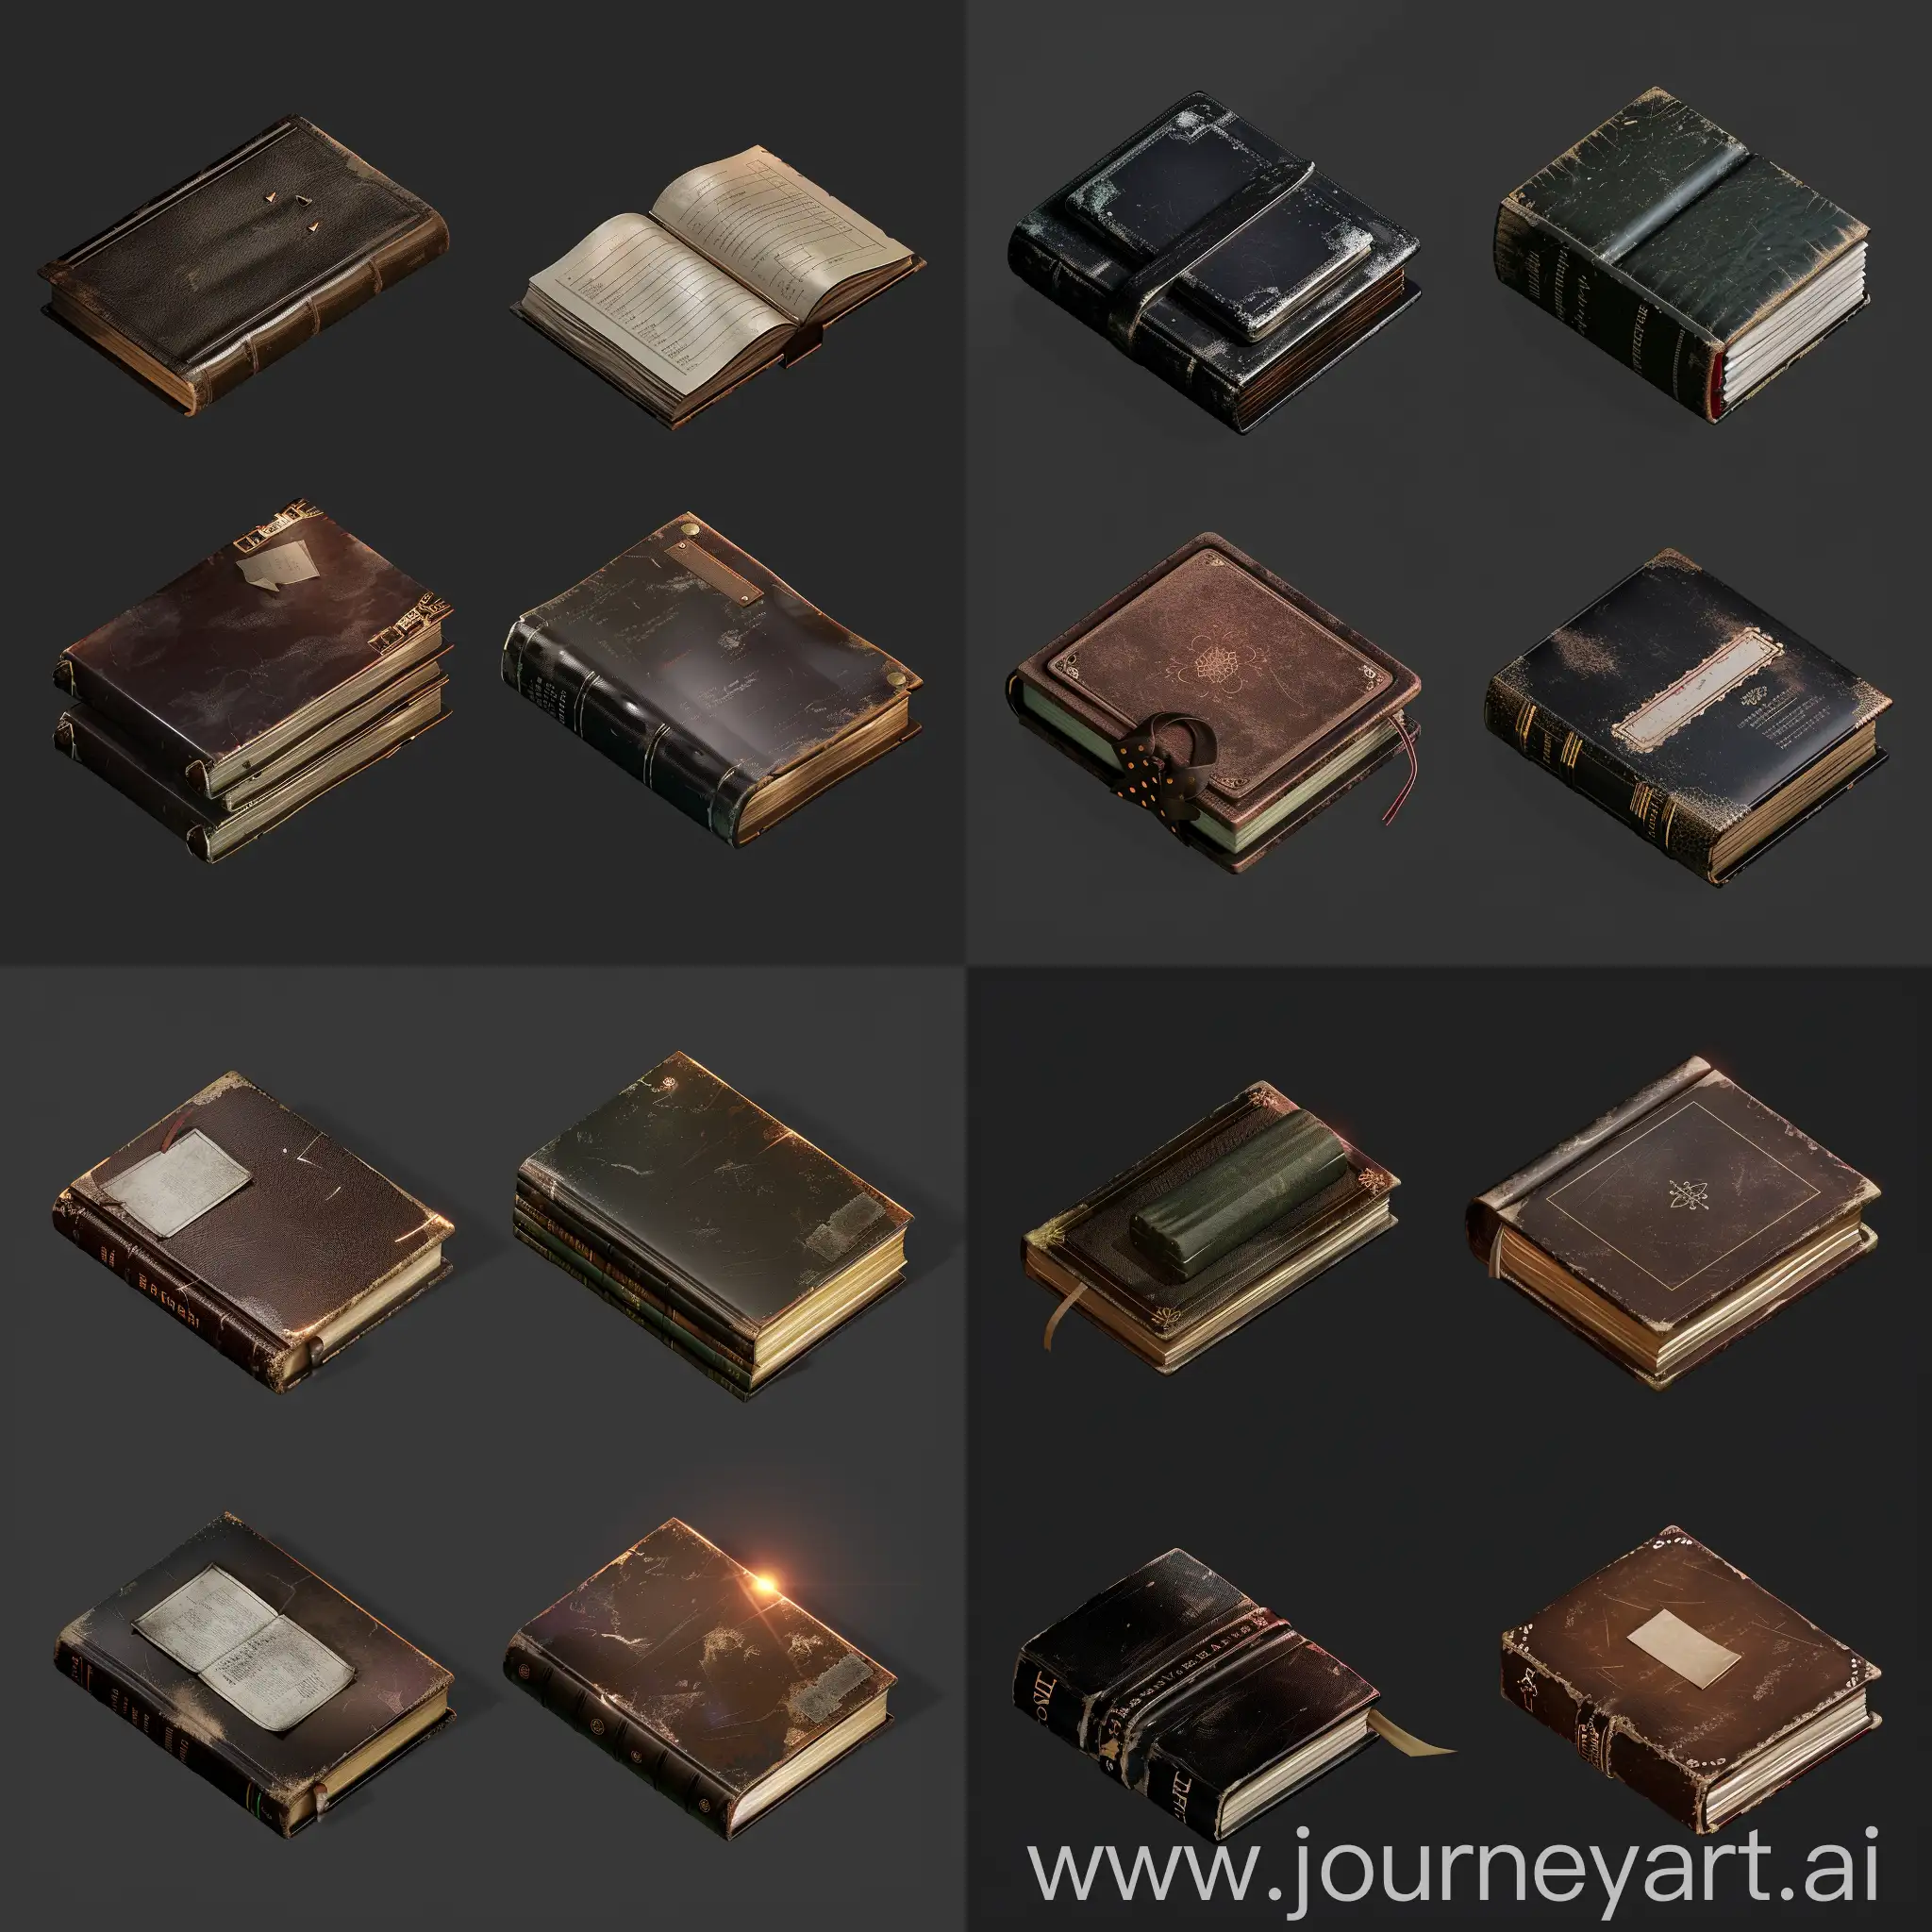 https://i.imgur.com/Do8RrB5.png realistic photo of isometric set of worn book without labels in style of unreal engine 5 realistic 3d game asset, shiny, lighting, leather cover, isometric set